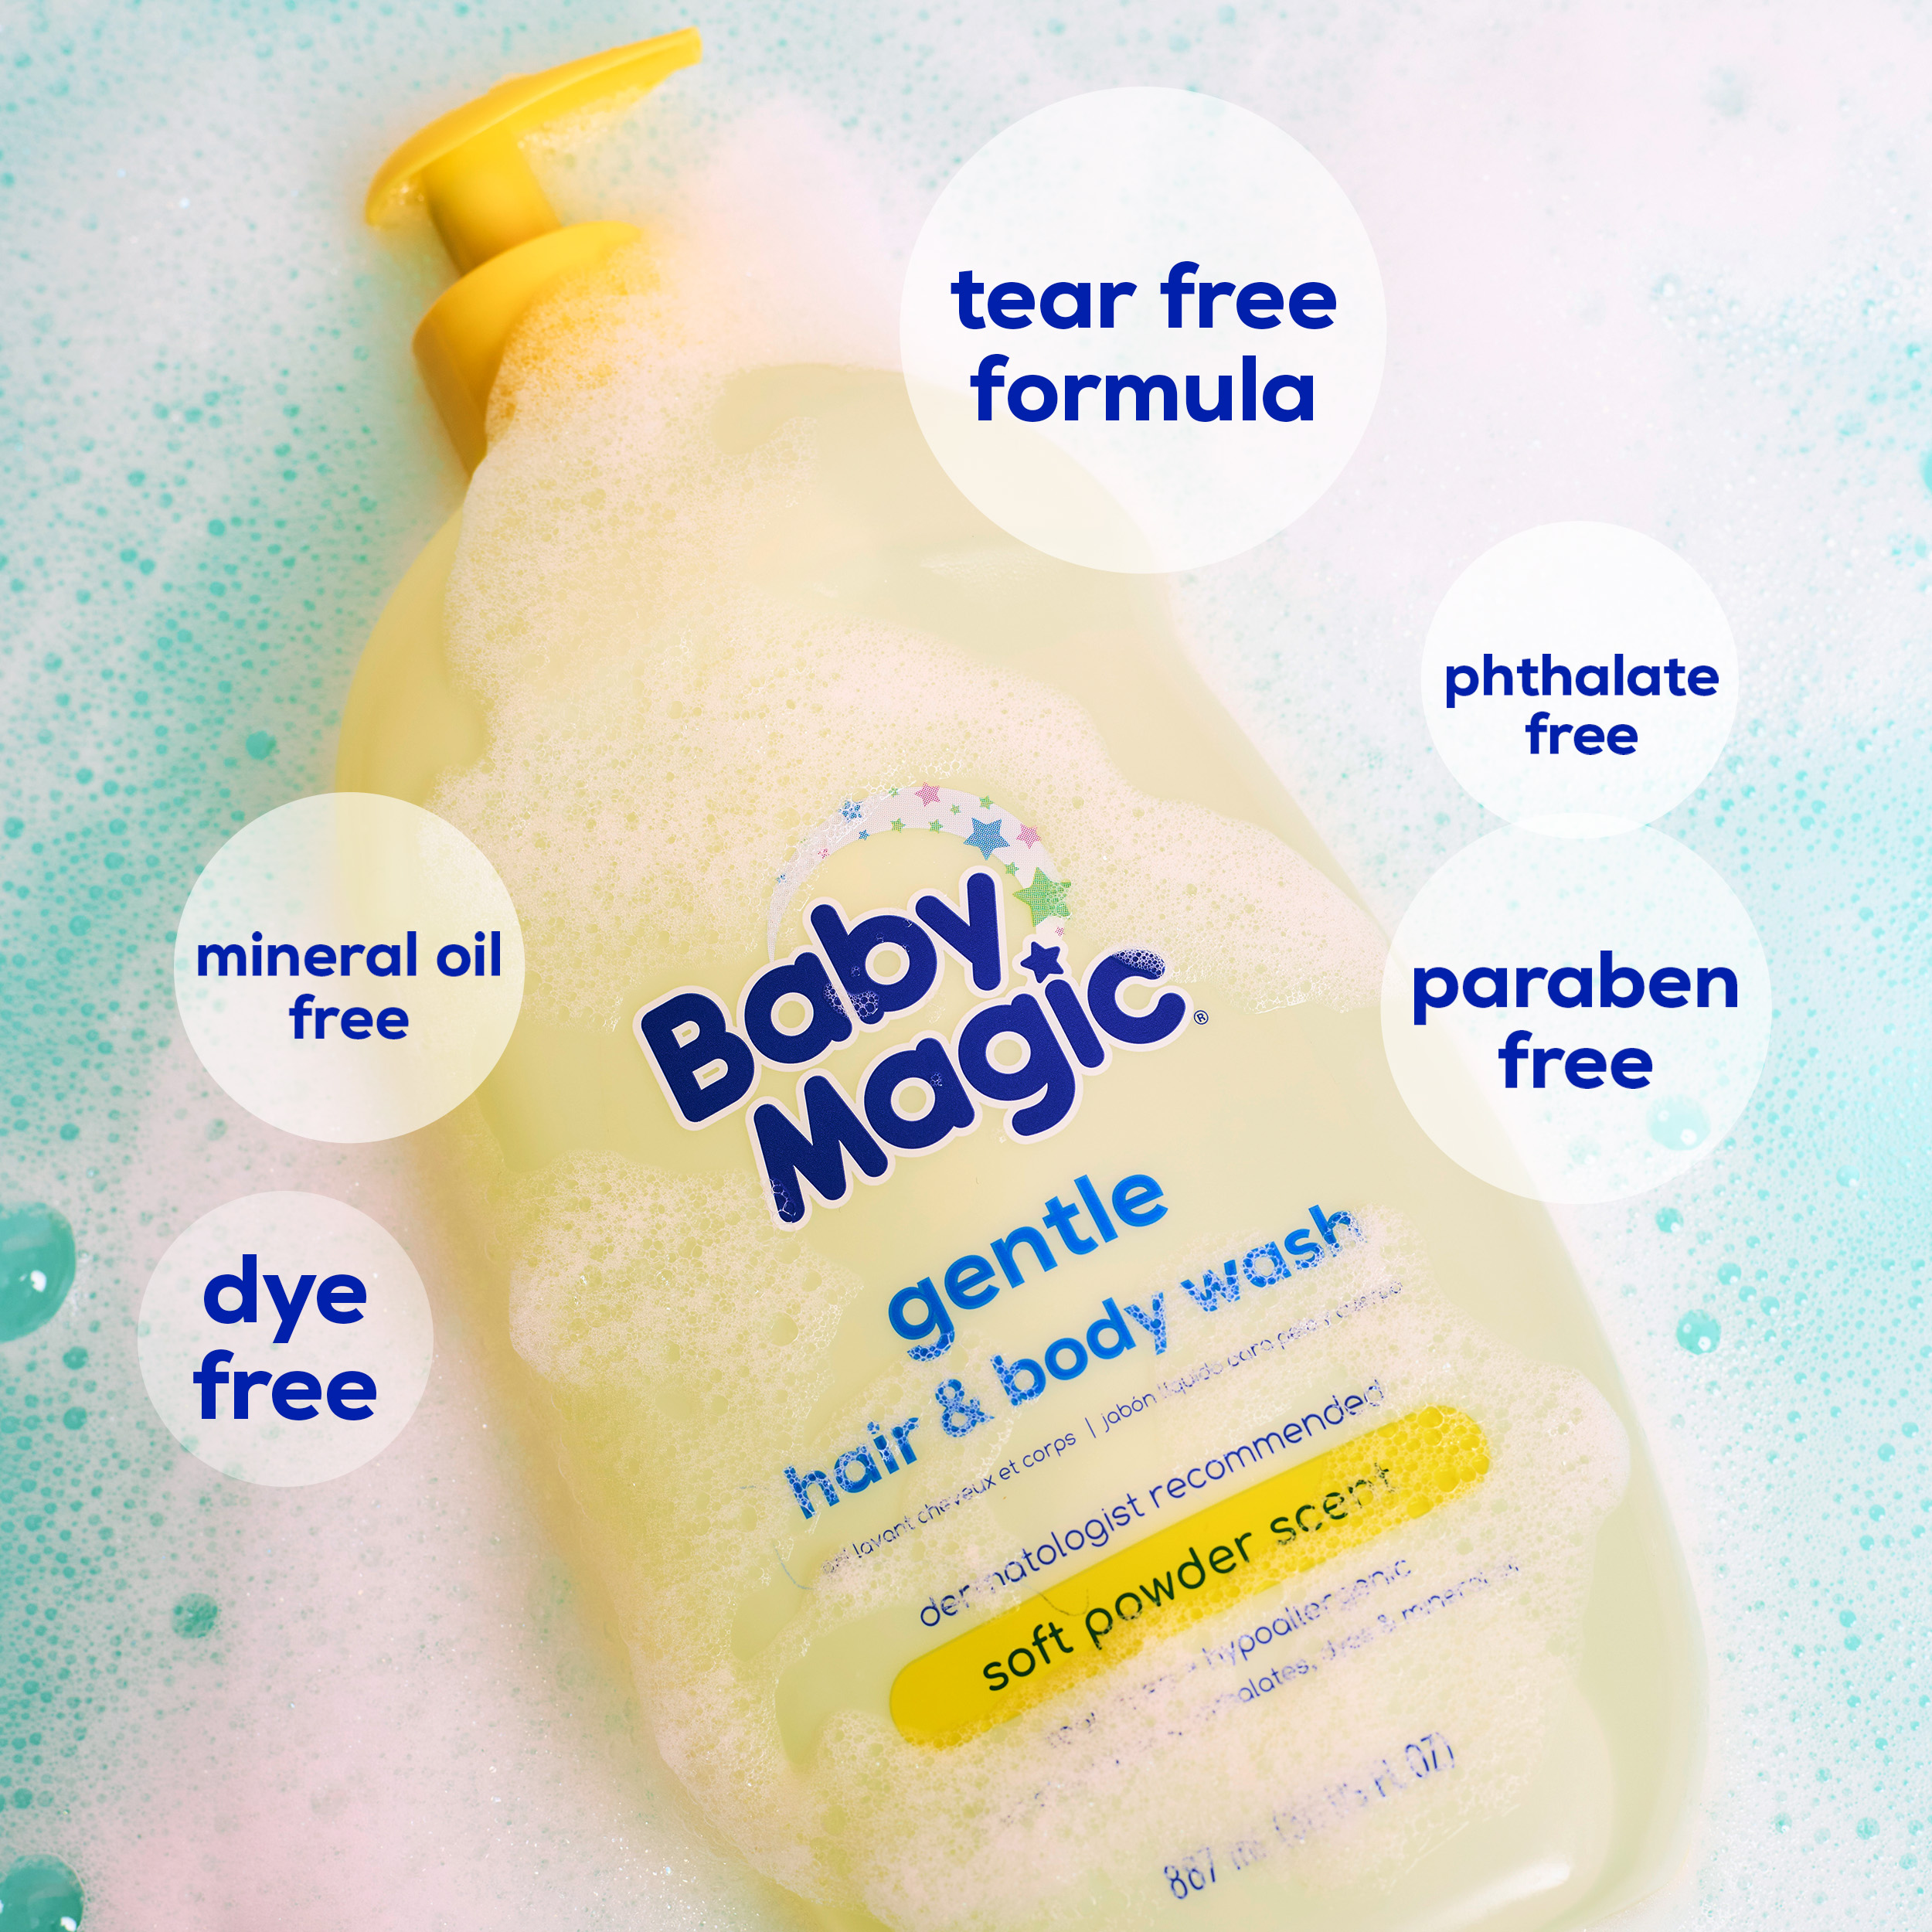 Baby Magic Tear-Free Gentle Hair and Body Wash, Soft Powder Scent, Hypoallergenic, 30 oz - image 2 of 7